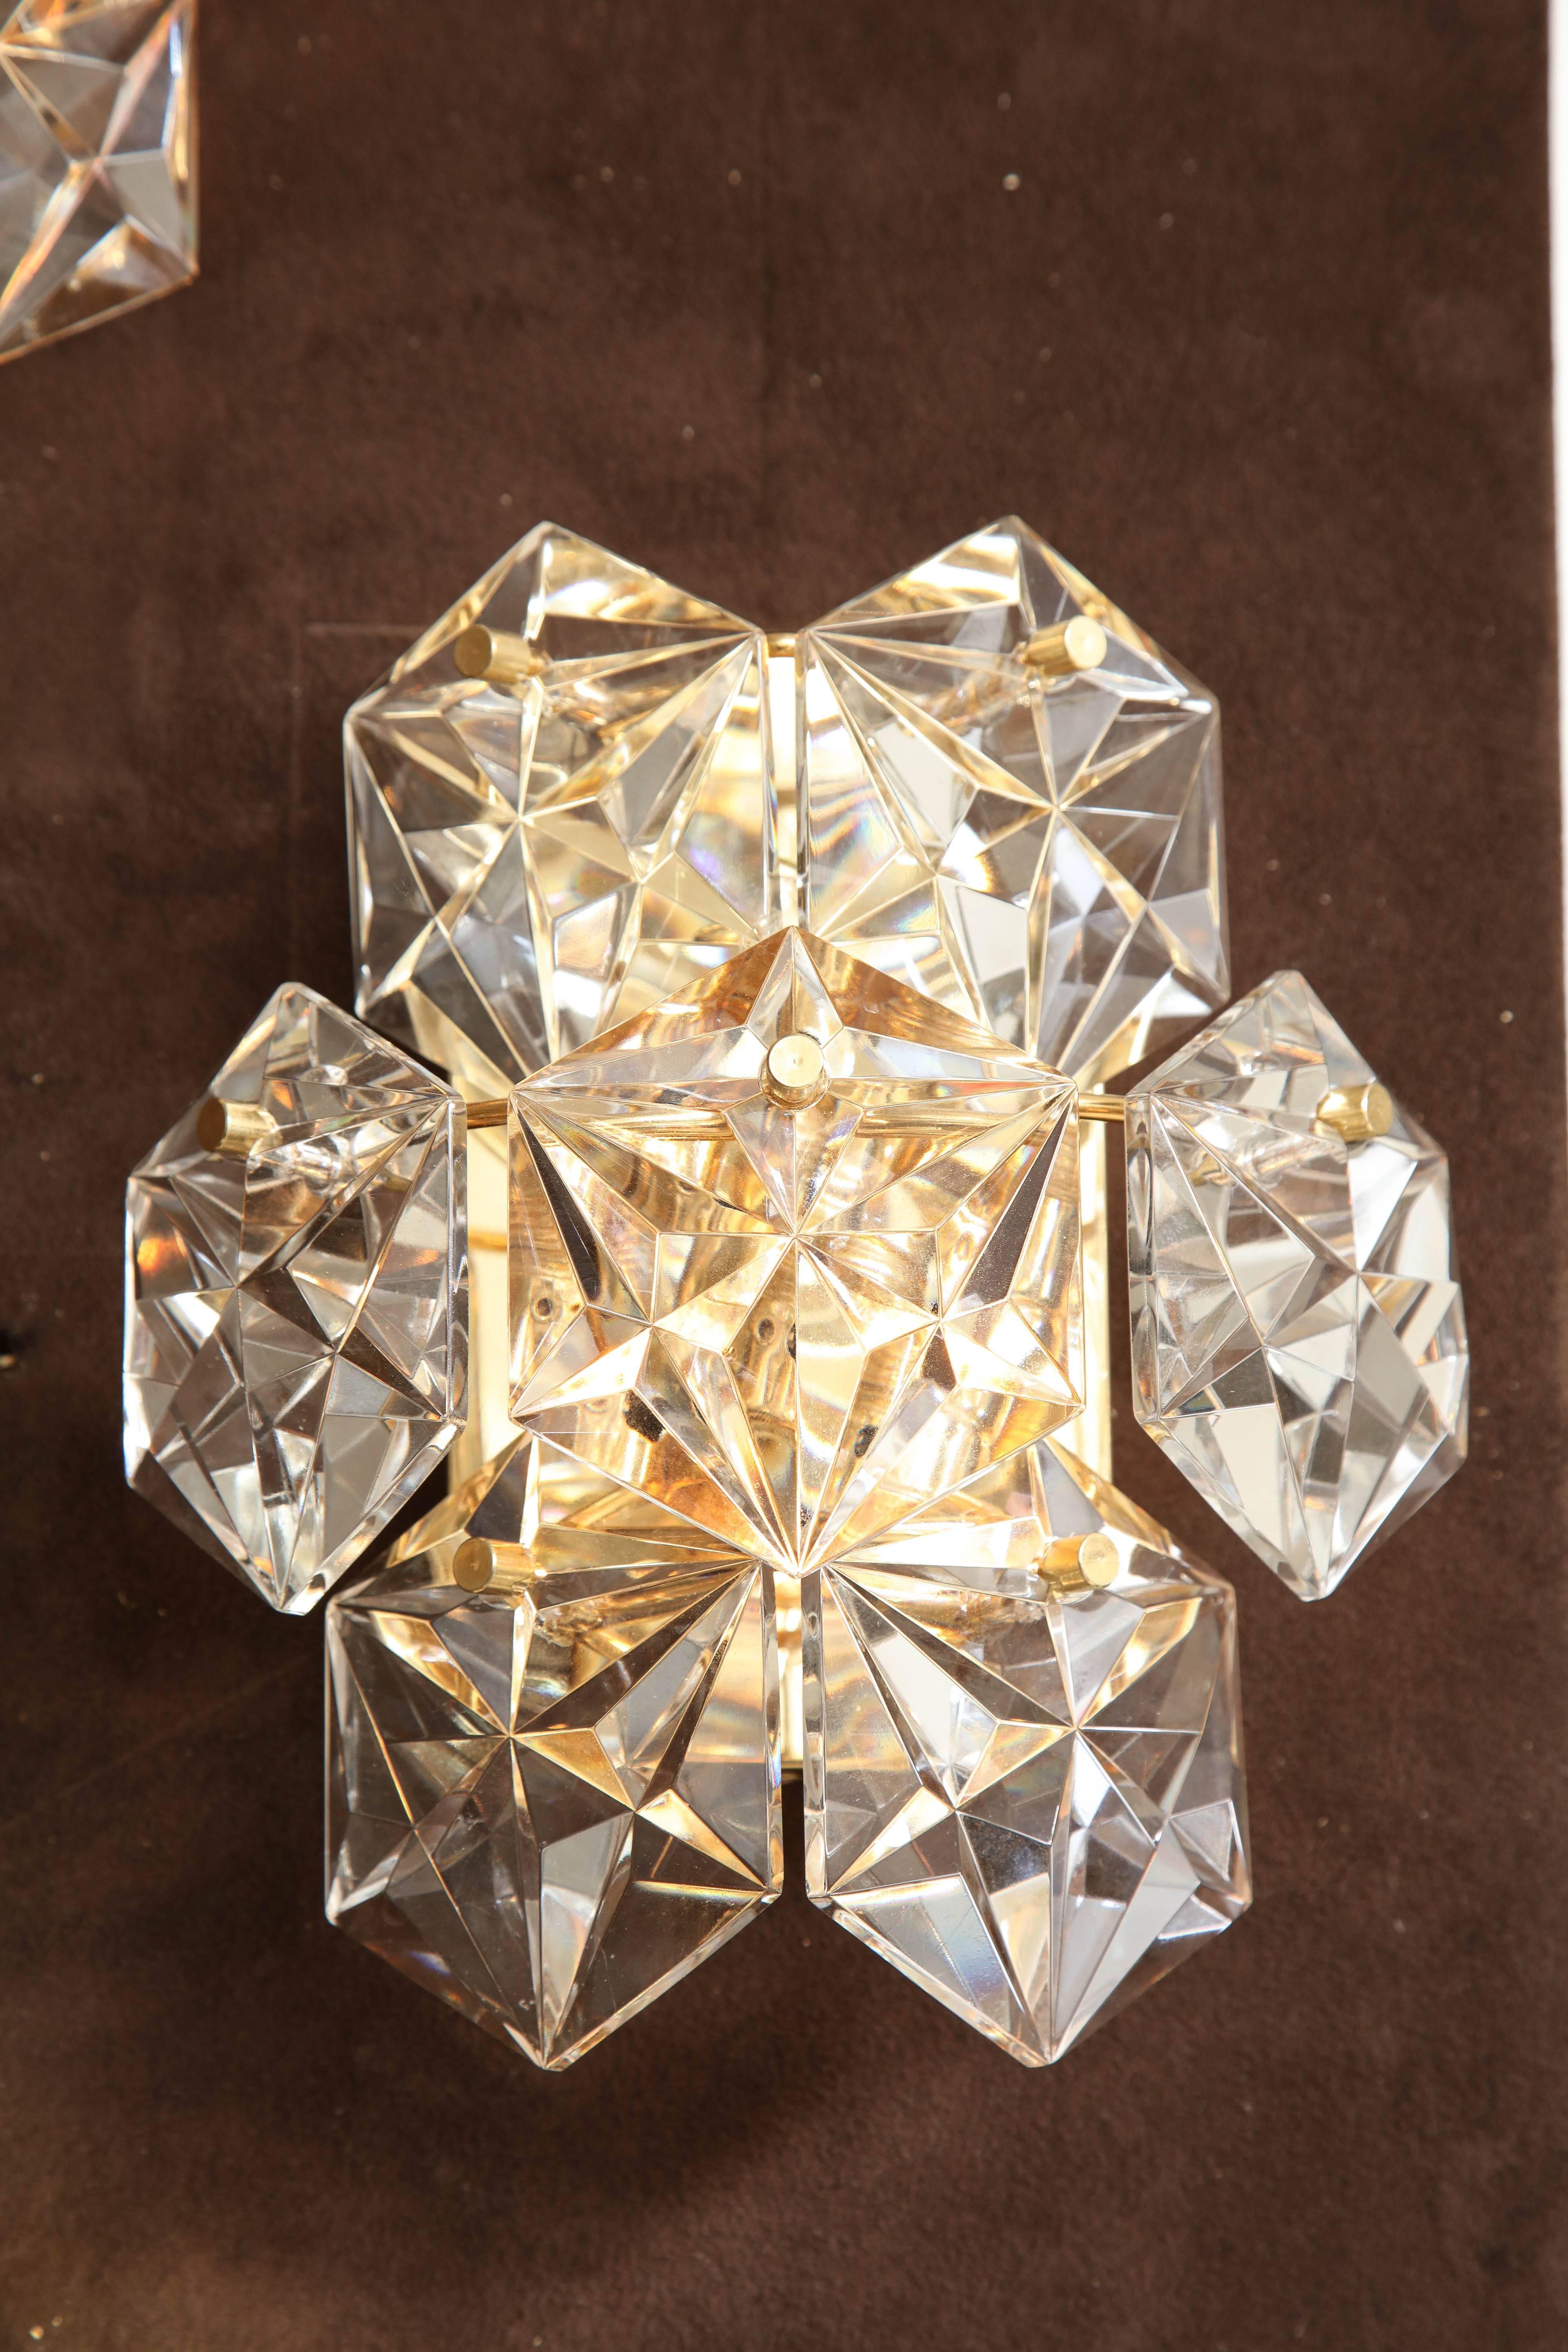 Elegant pair of faceted crystal sconces on polished 22-karat gold plated backplates.
Each sconce has seven crystal elements and two-light sources that have been newly rewired.